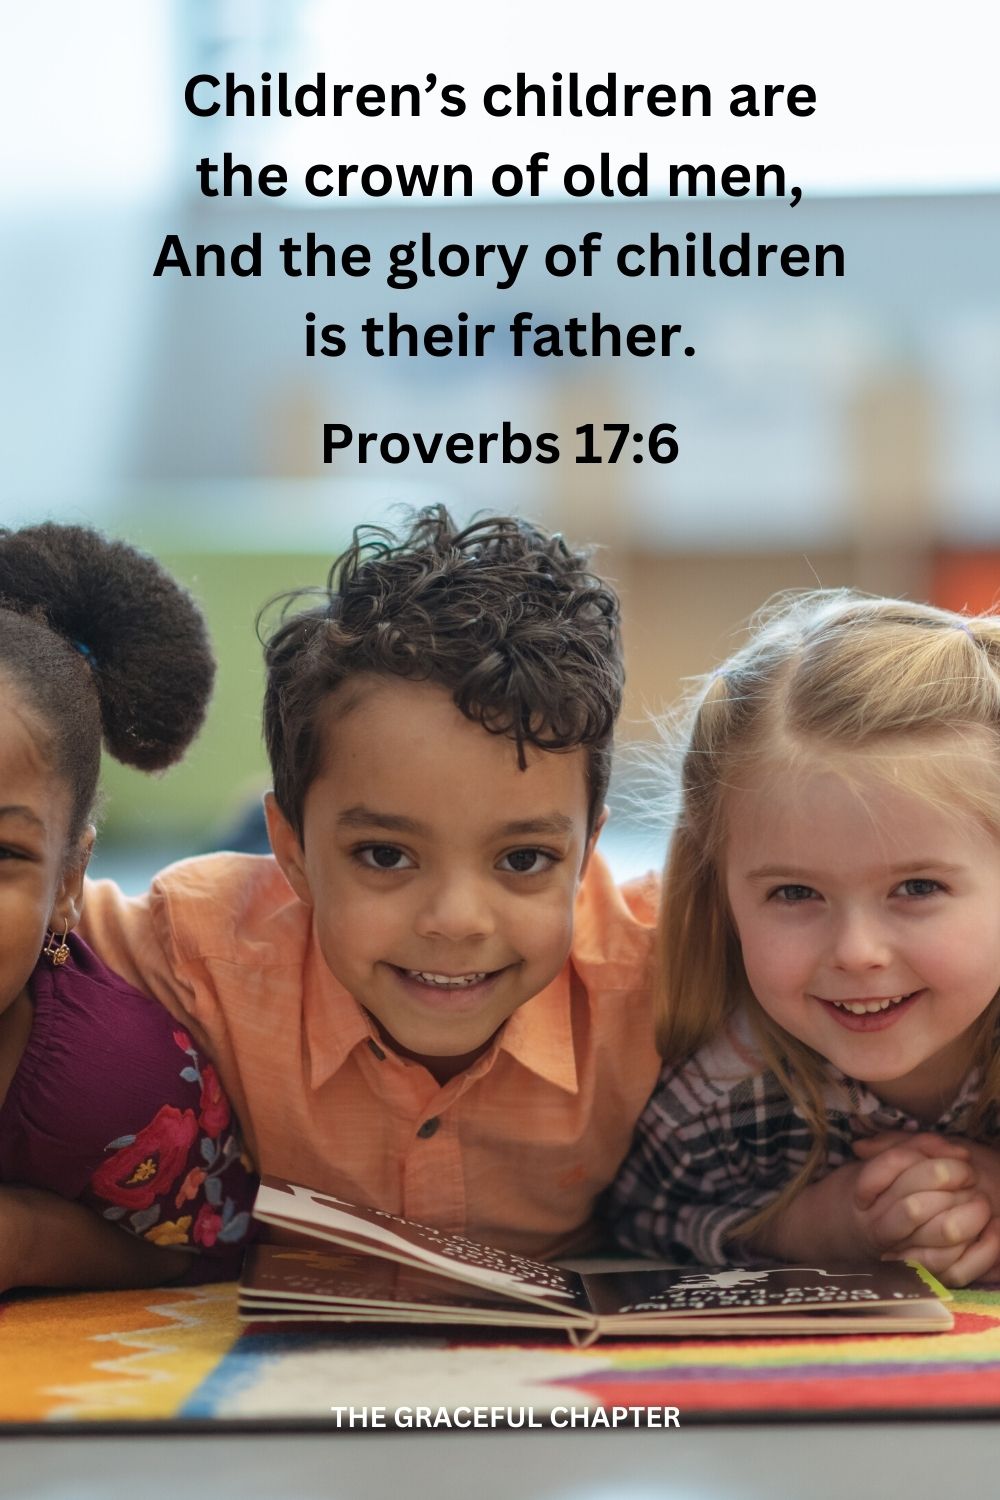 Children’s children are the crown of old men, And the glory of children is their father Proverbs 17:6